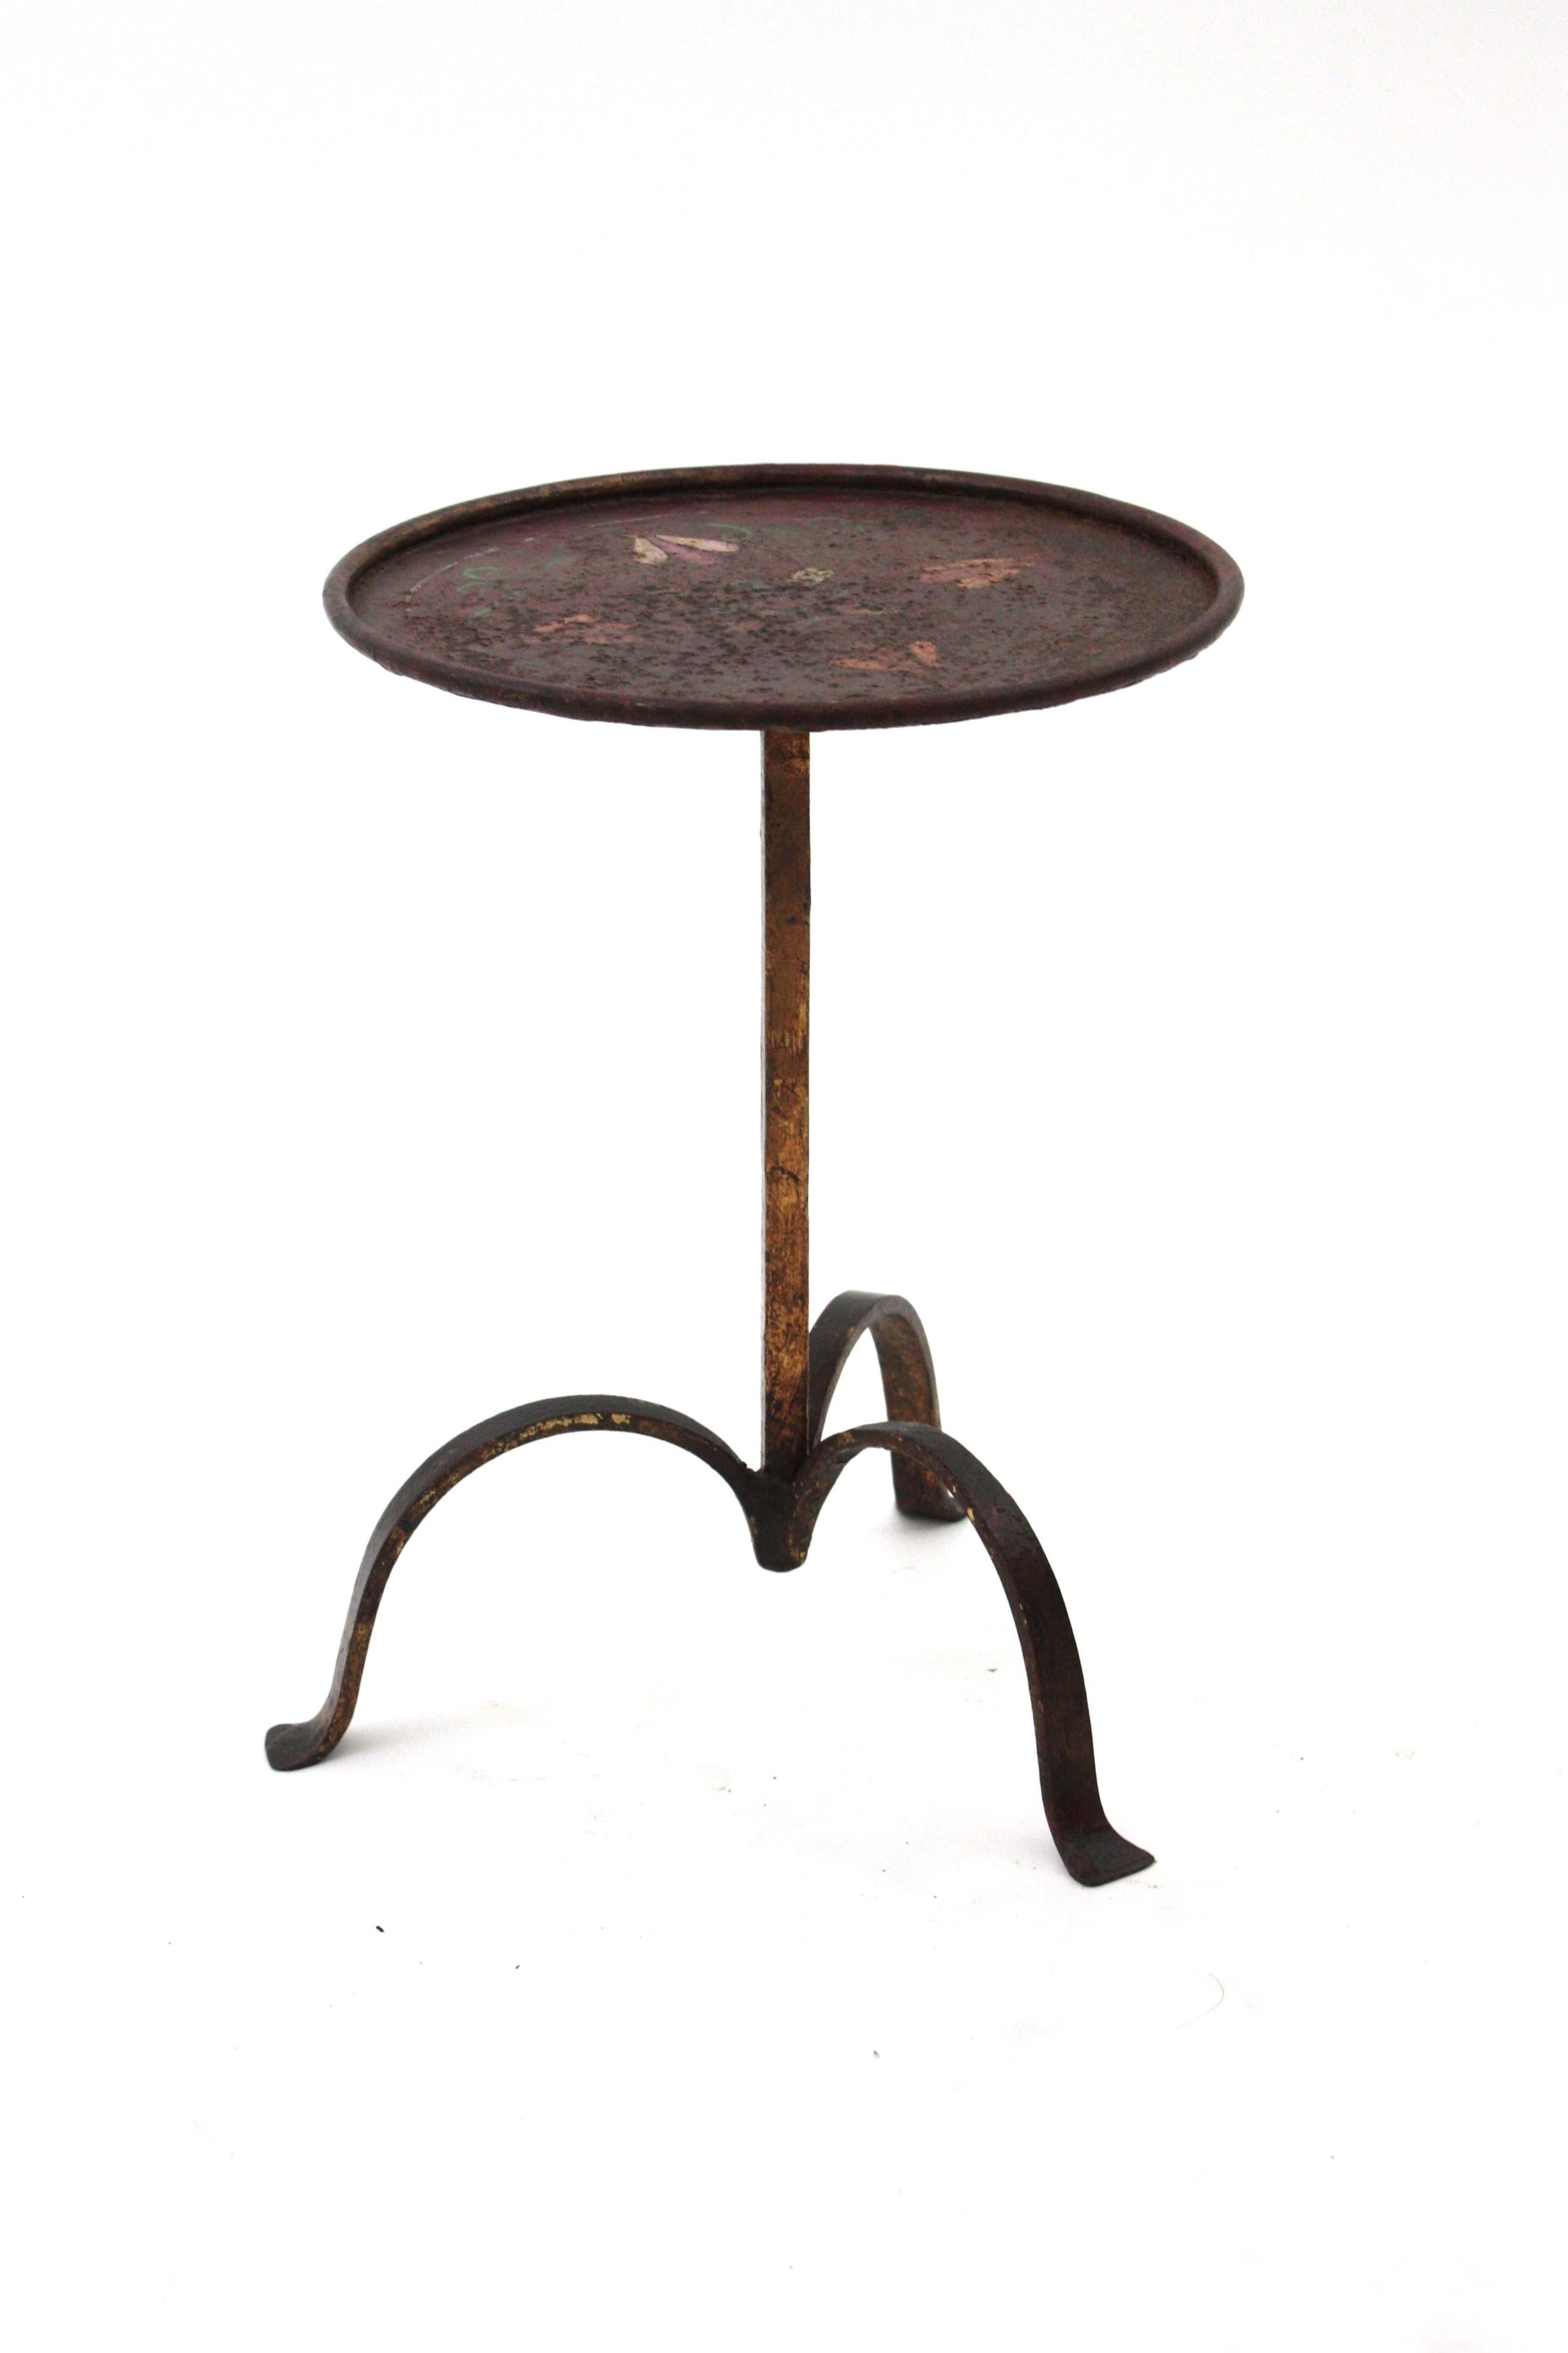 Spanish Drinks Table, End Table, Martini Table in Polychromed Gilt Iron, 1940s For Sale 3